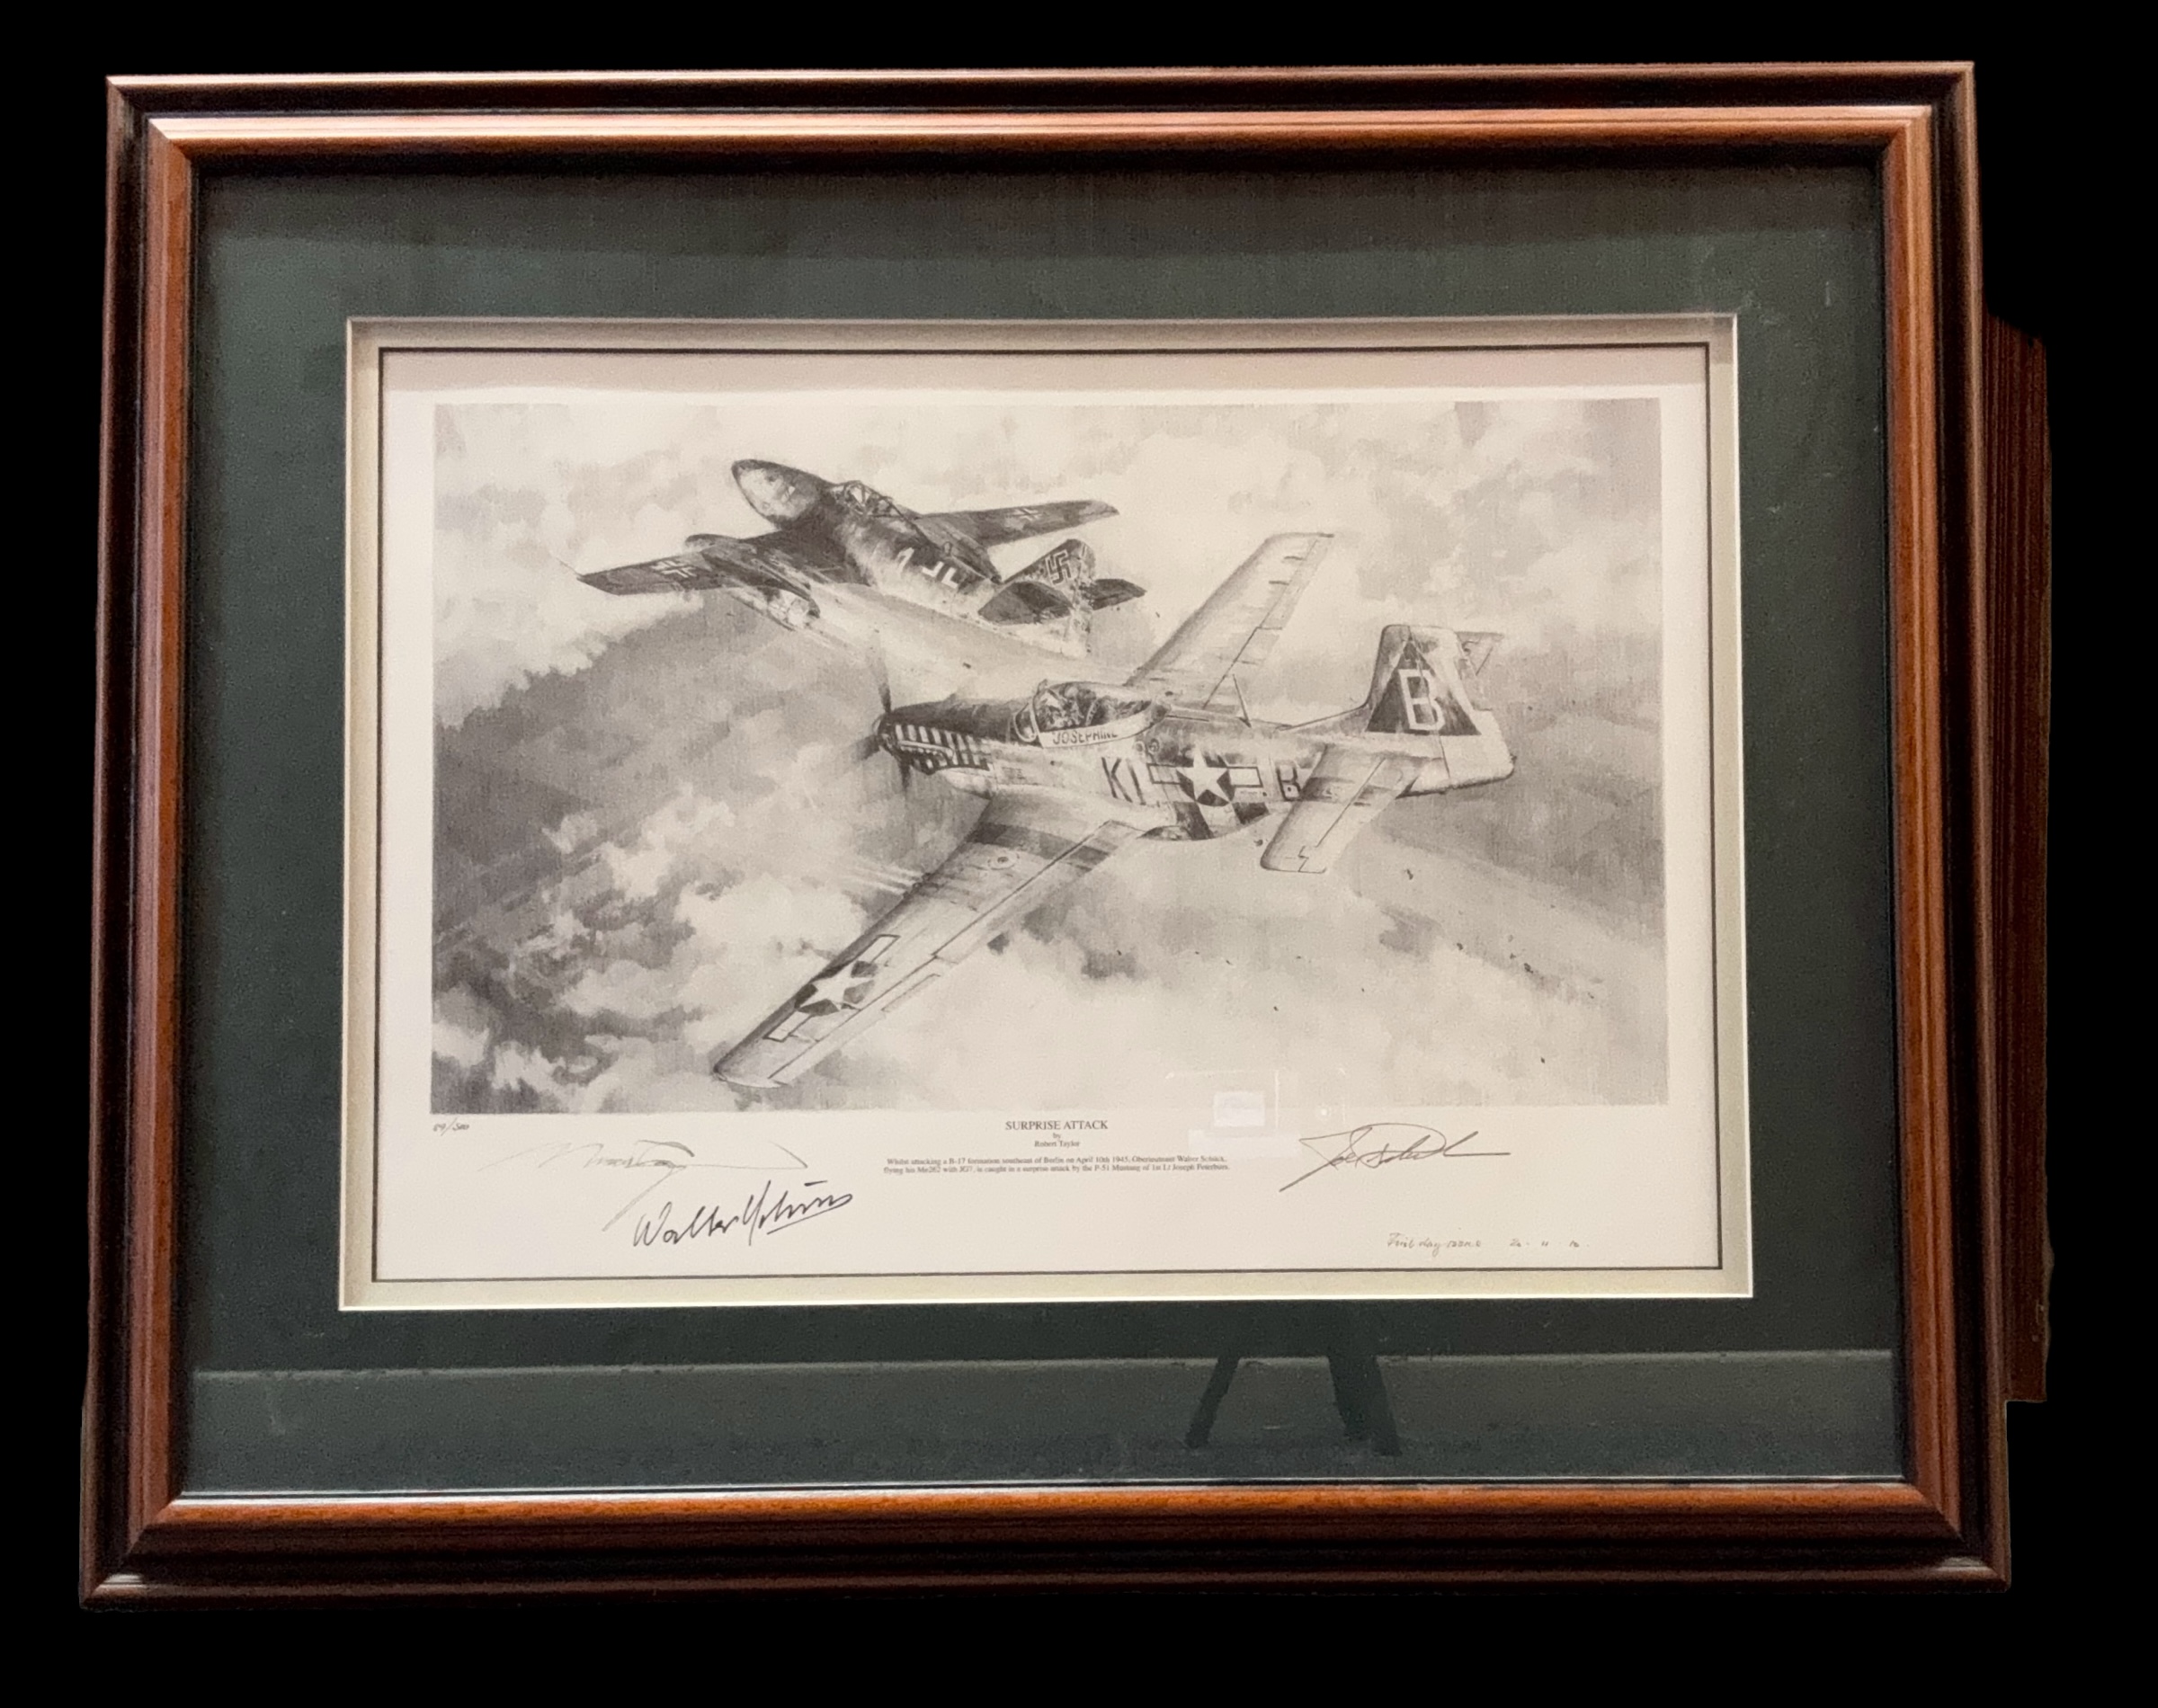 WW2 Print titled Surprise Attack by Robert Taylor. Limited 89/500 F.D.I 20.11.2010. Multi signed